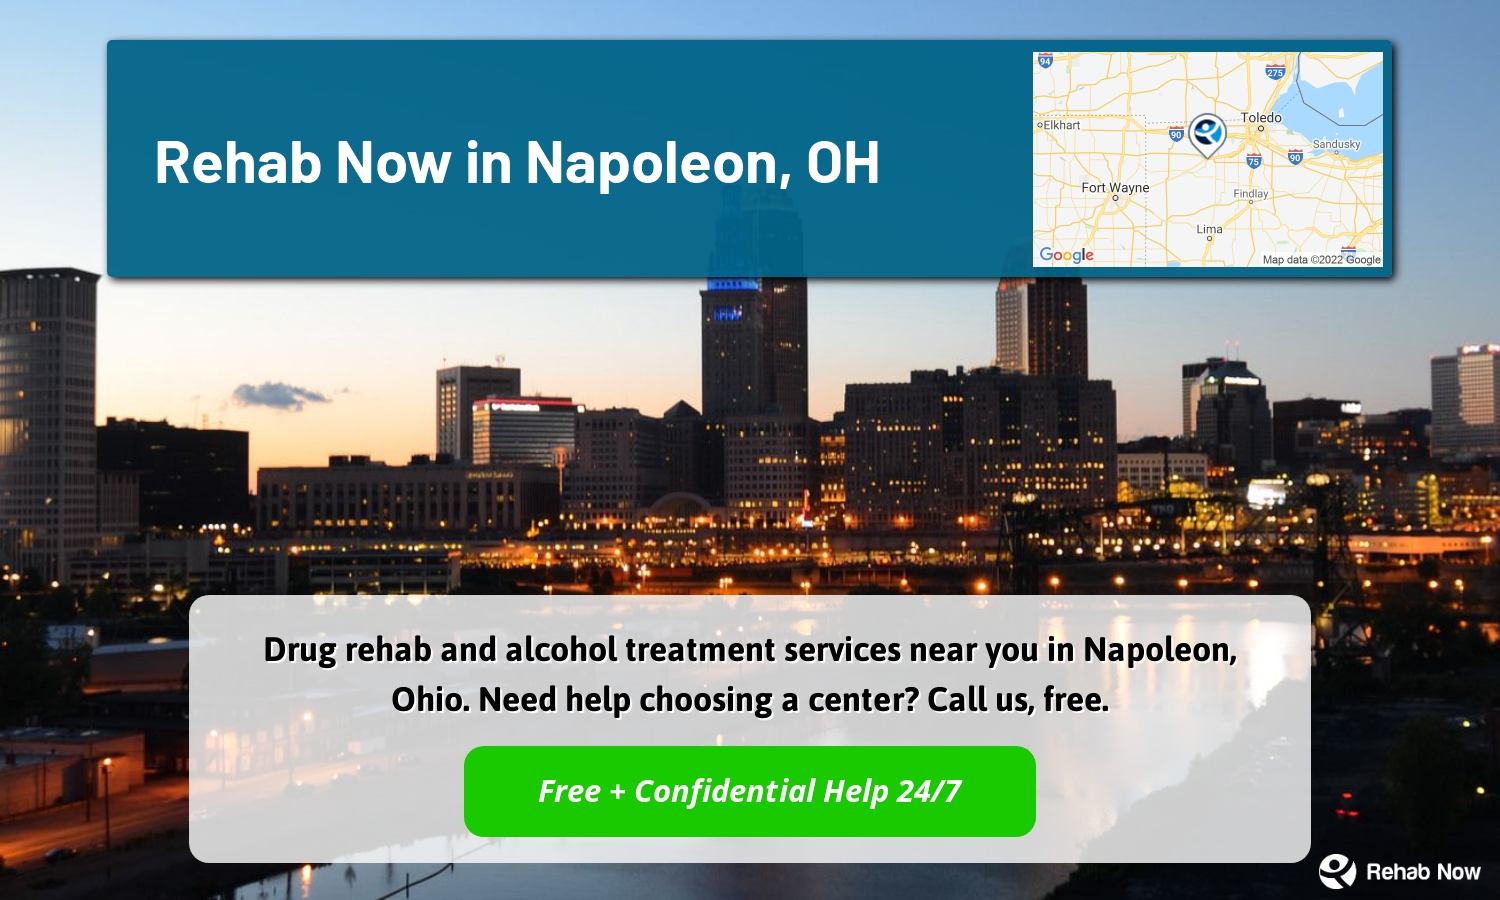 Drug rehab and alcohol treatment services near you in Napoleon, Ohio. Need help choosing a center? Call us, free.